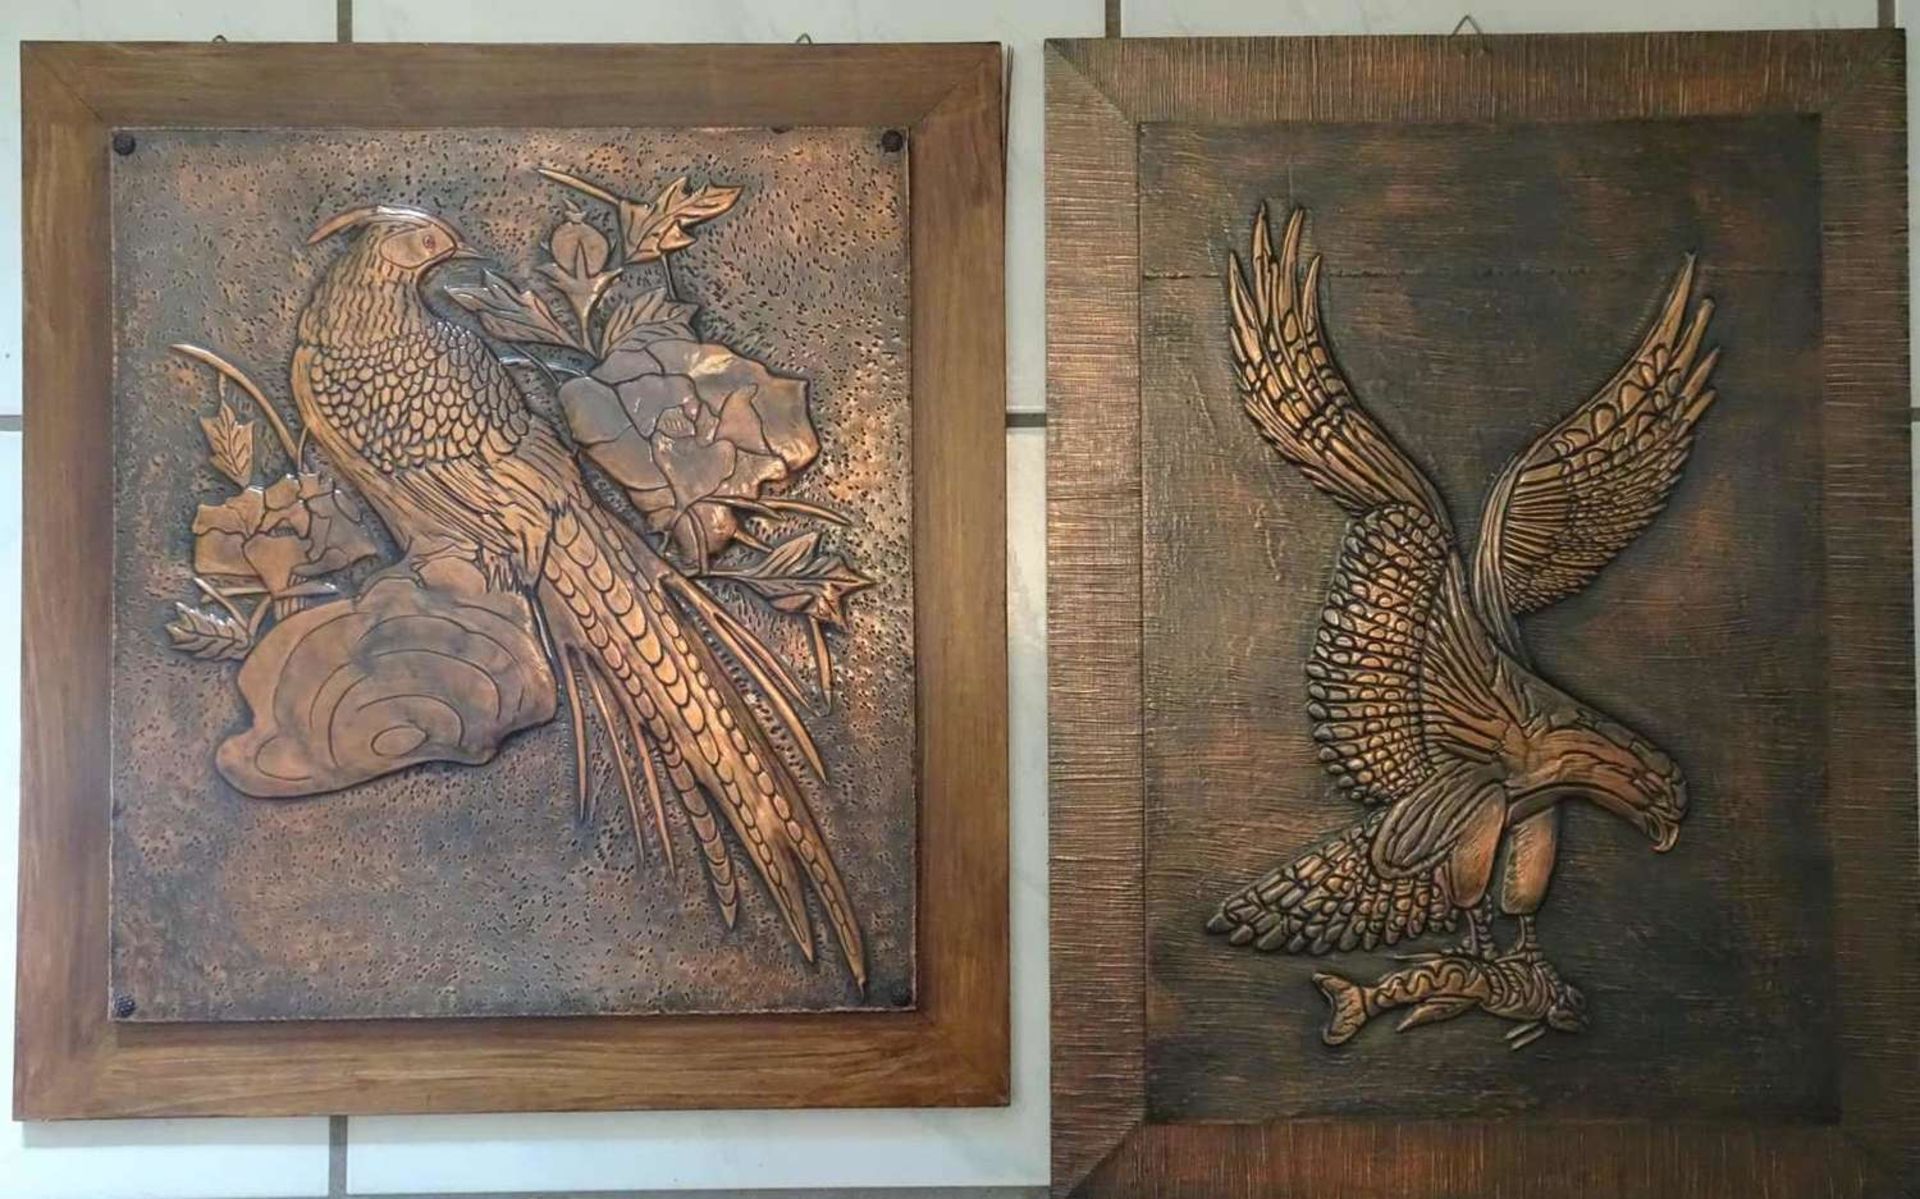 2 copper pictures "Adler", dimensions: height approx. 55 cm, width approx. 37 cm, and 1 pheasant,